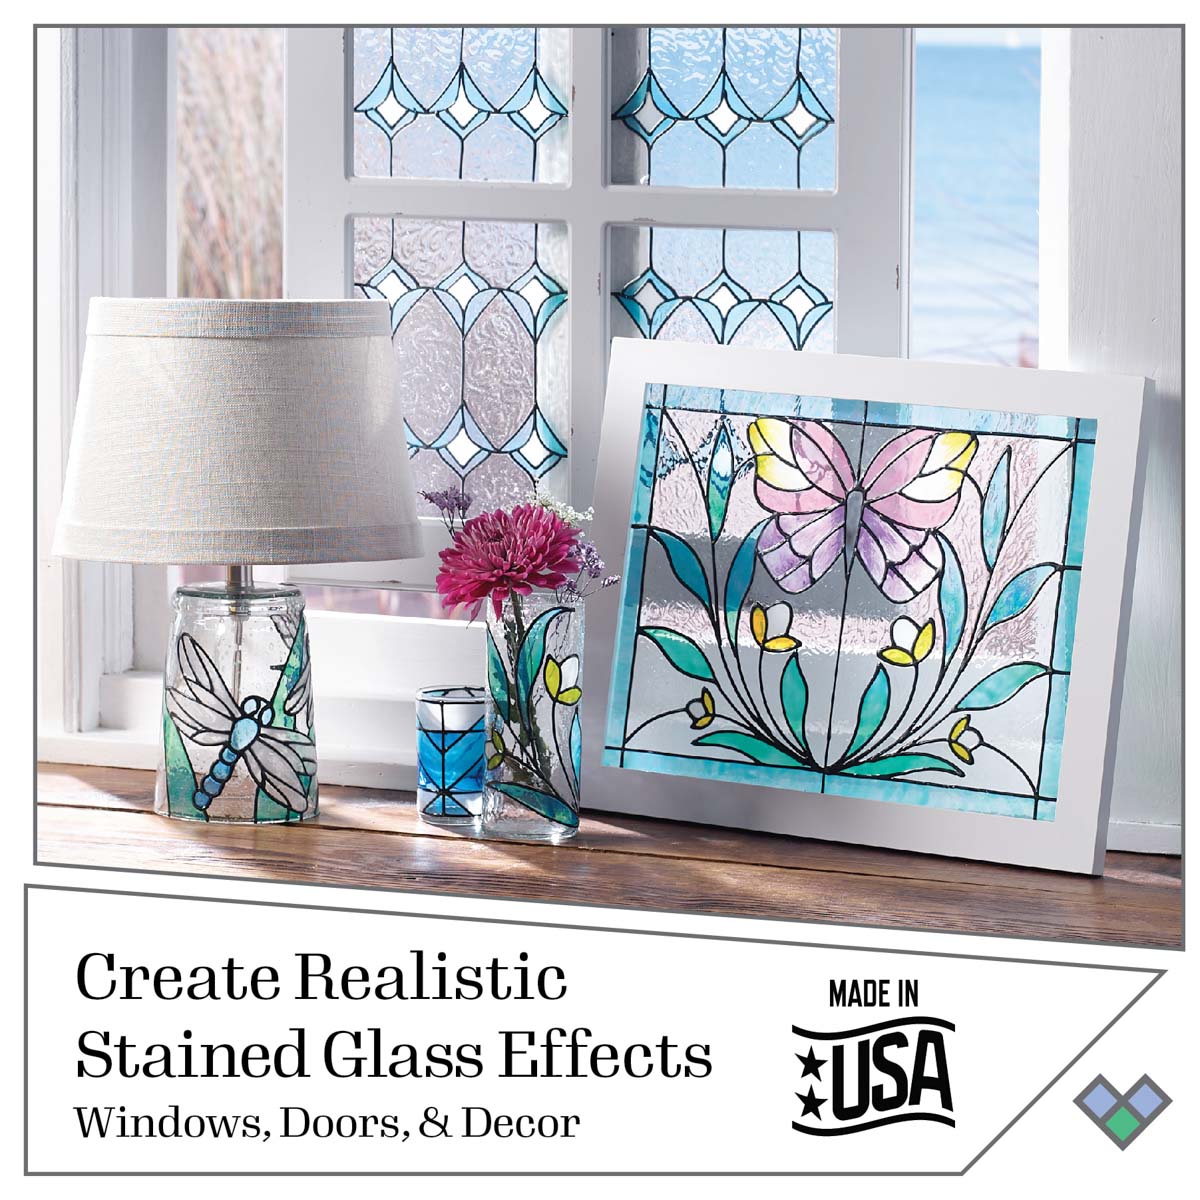 Gallery Glass ® Stained Glass Effect Paint - Magenta Rose, 2 oz. - 19694